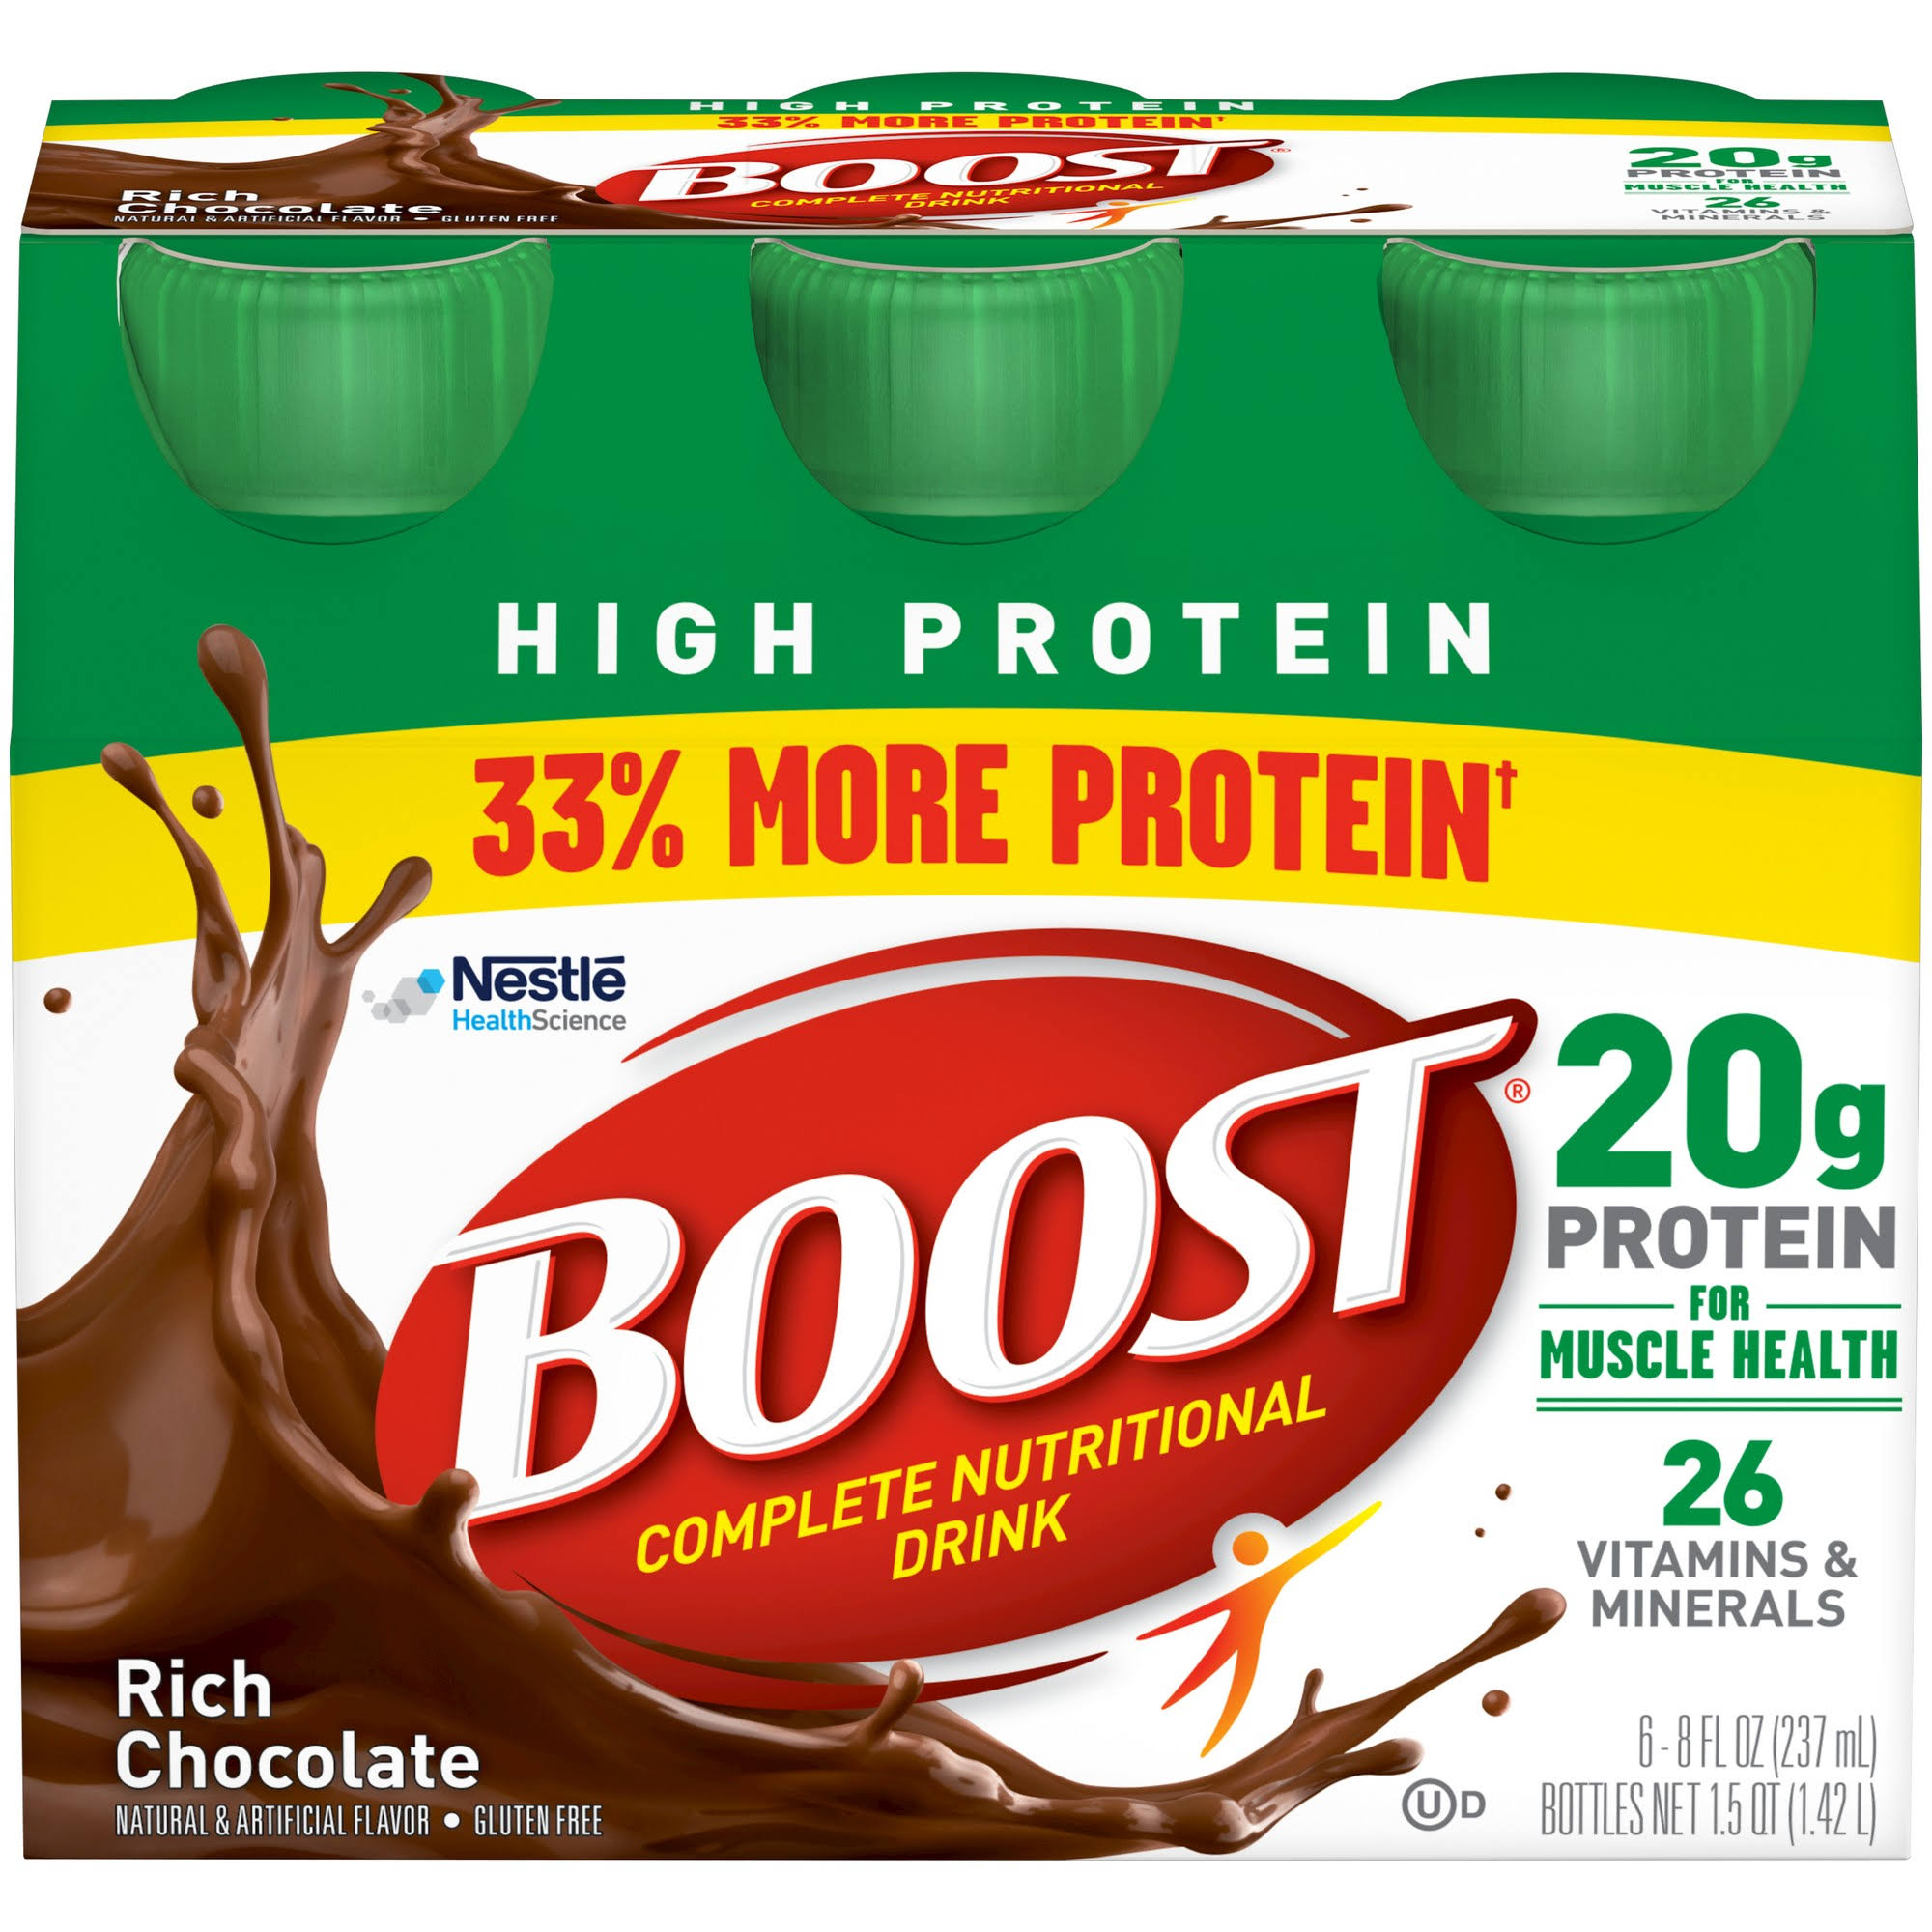 Boost Complete High Protein Nutritional Drink - Rich Chocolate, 8oz